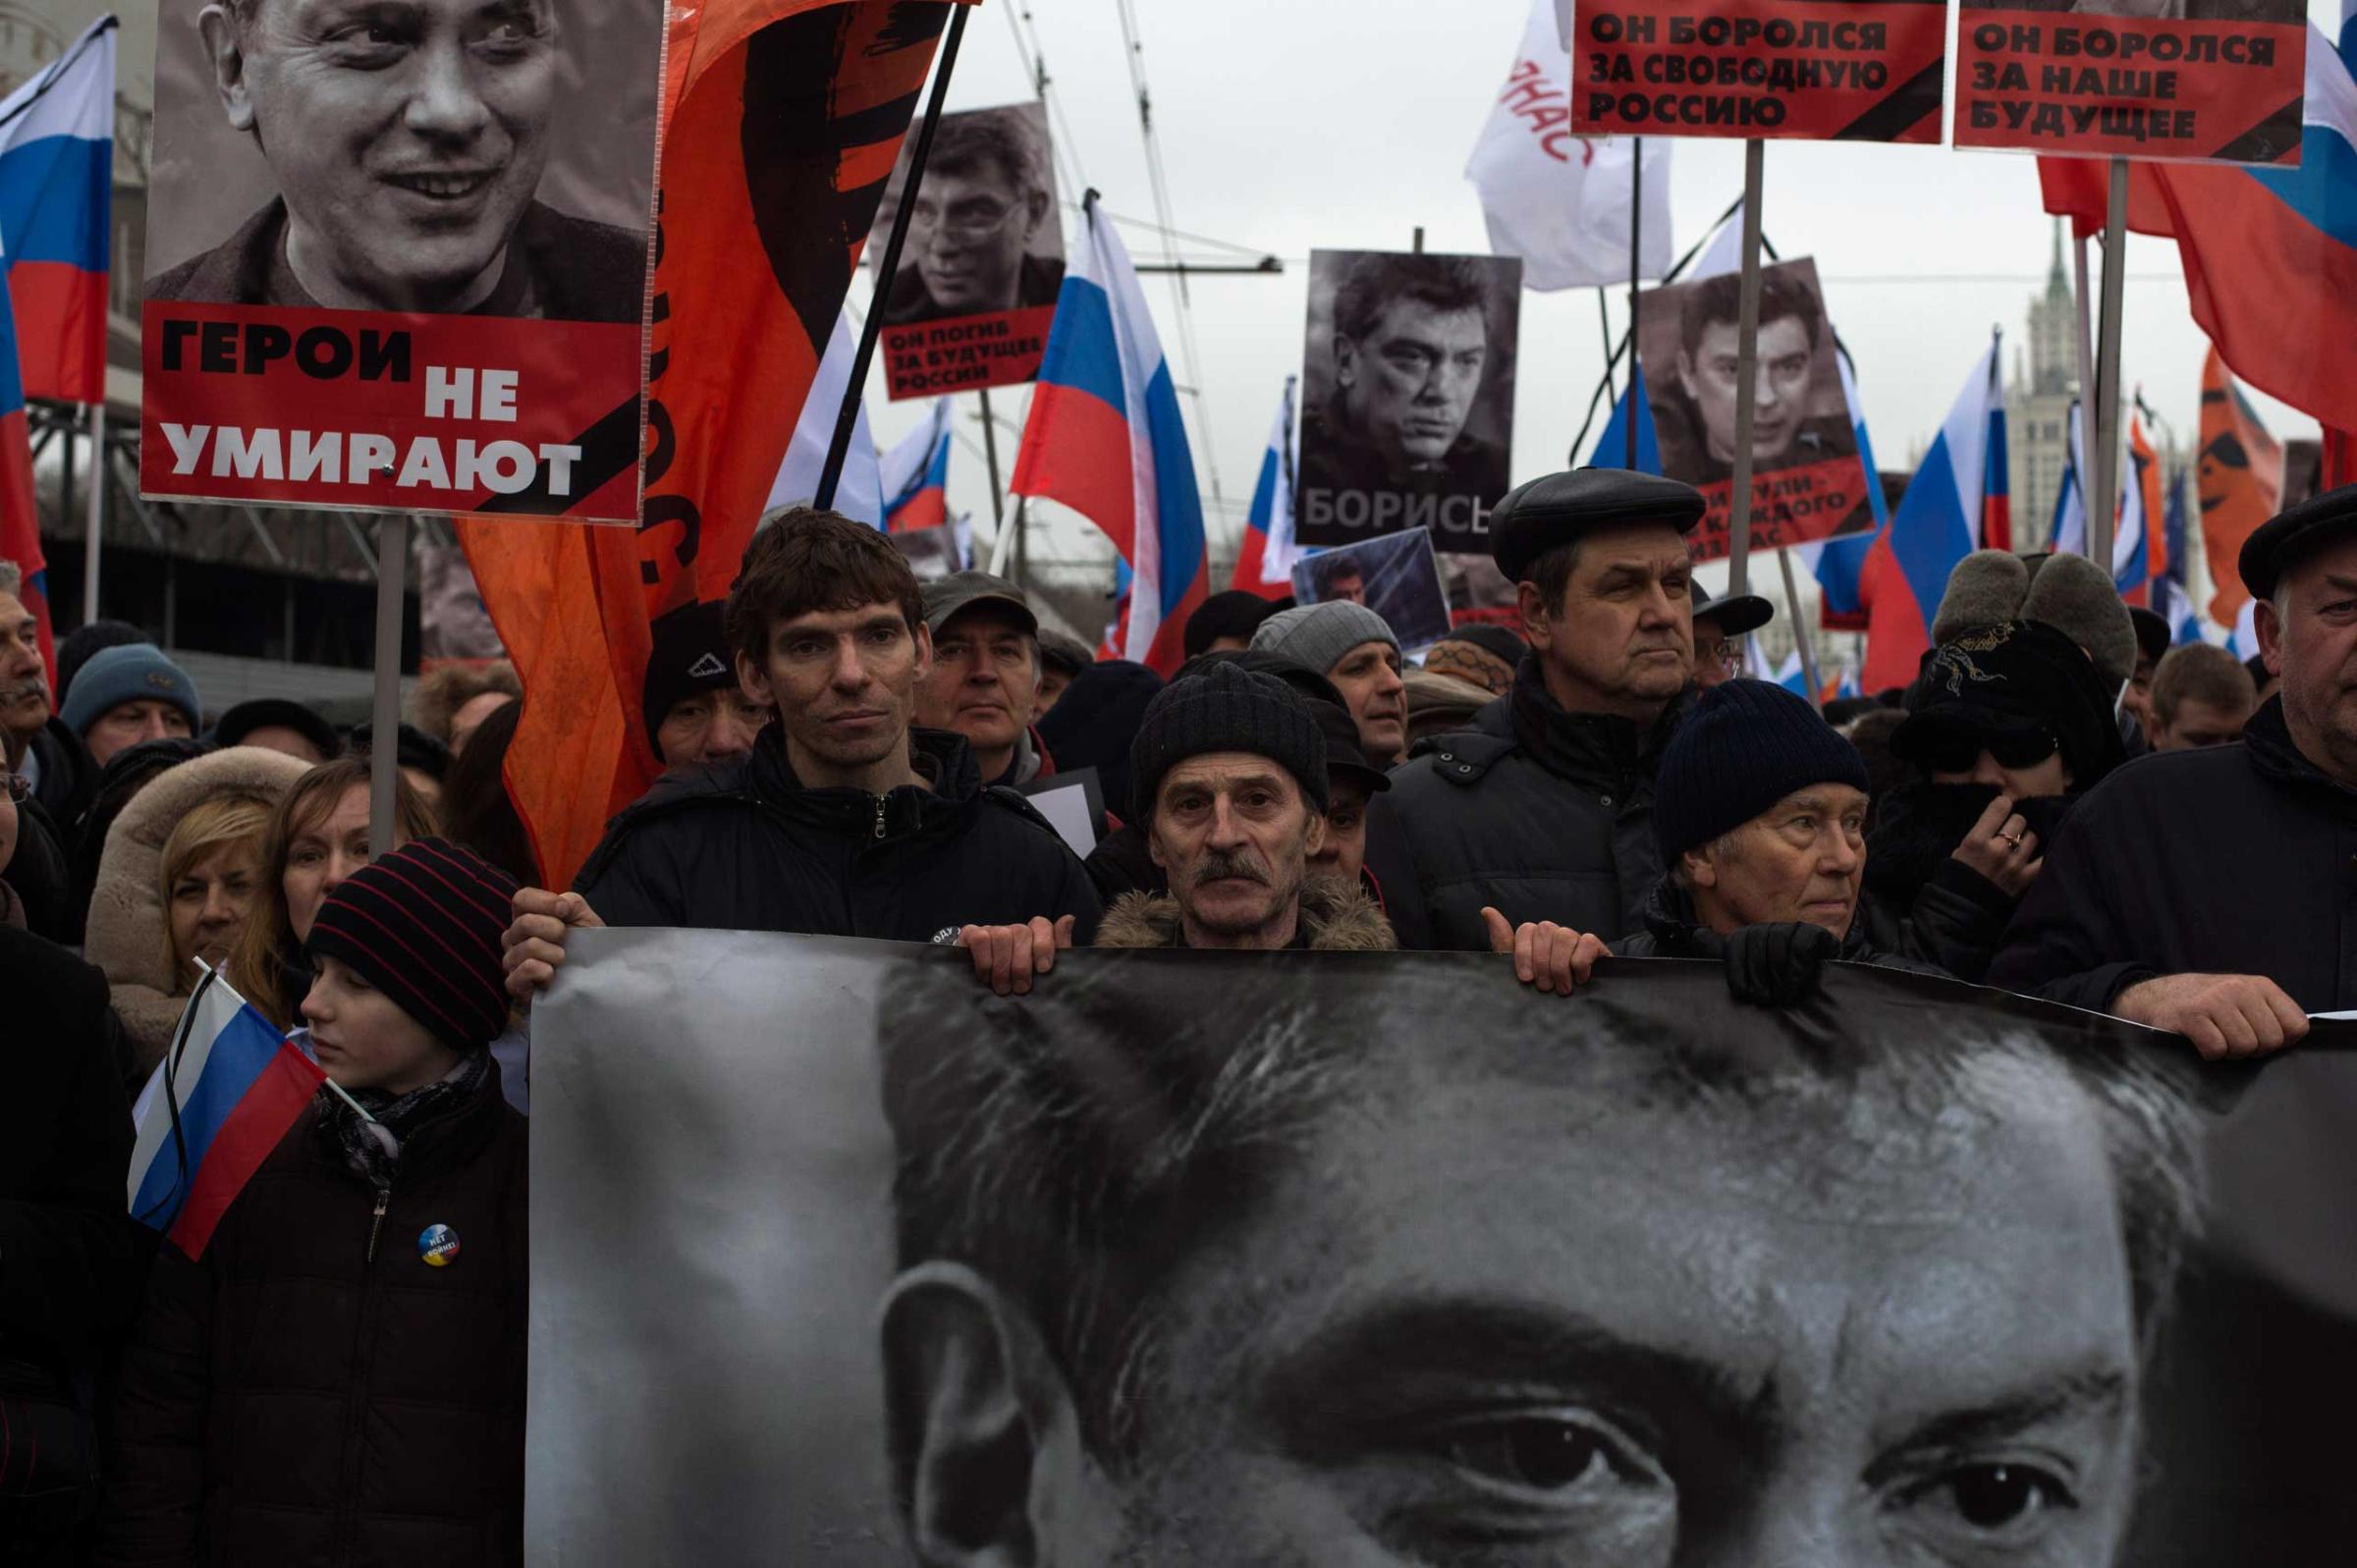 Moscow, Russia, Sunday, March 1, 2015. People carry a huge banner reading 'those bullets for everyone of us, heroes never die!' as they march in memory of opposition leader Boris Nemtsov who was gunned down on Friday, Feb. 27, 2015 near the Kremlin.Thousands converged Sunday in central Moscow to mourn veteran liberal politician Boris Nemtsov, whose killing on the streets of the capital has shaken Russia’s beleaguered opposition. They carried flowers, portraits and white signs that said “I am not afraid.”